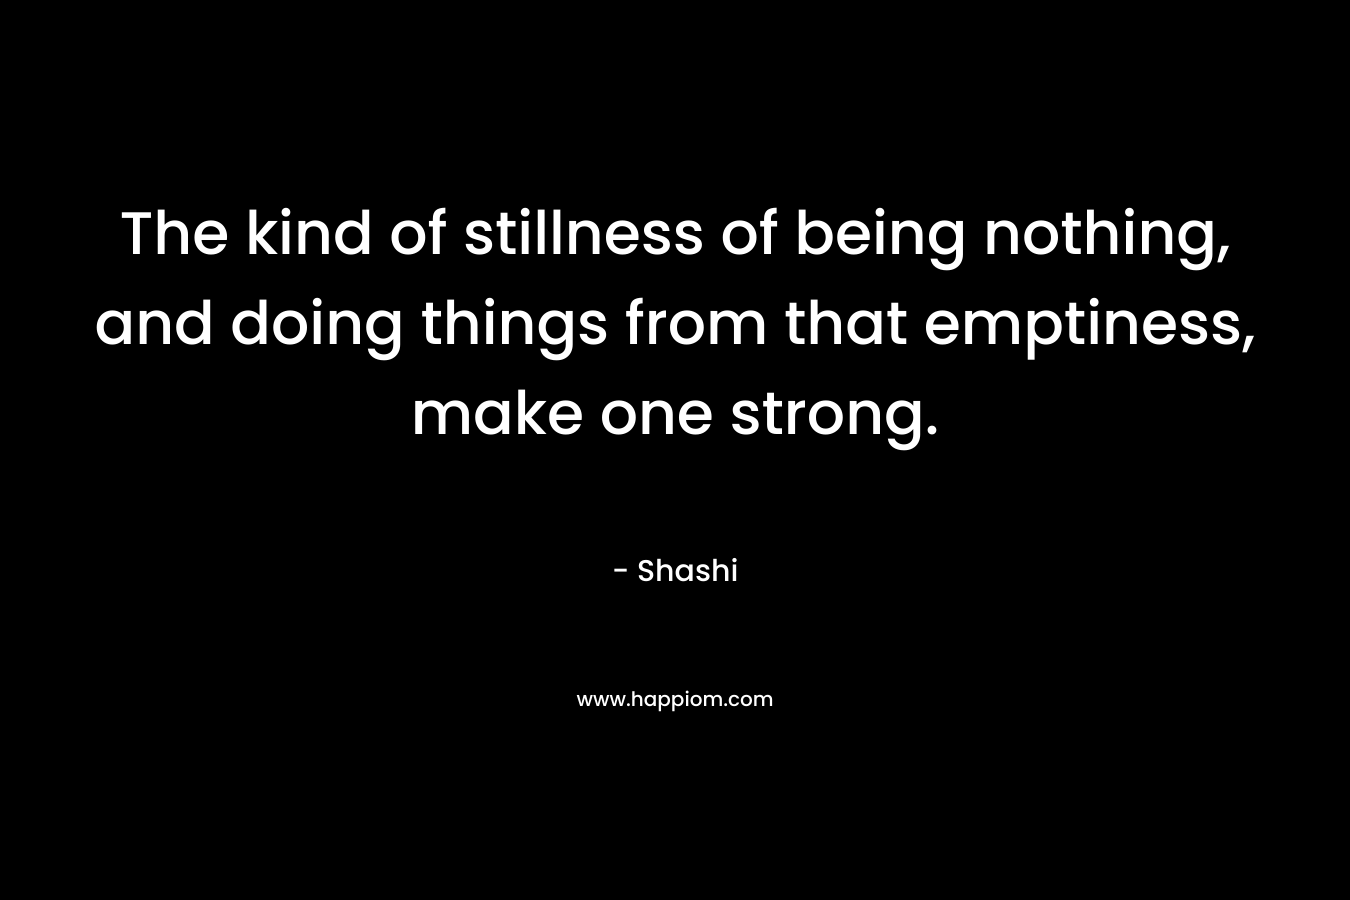 The kind of stillness of being nothing, and doing things from that emptiness, make one strong.